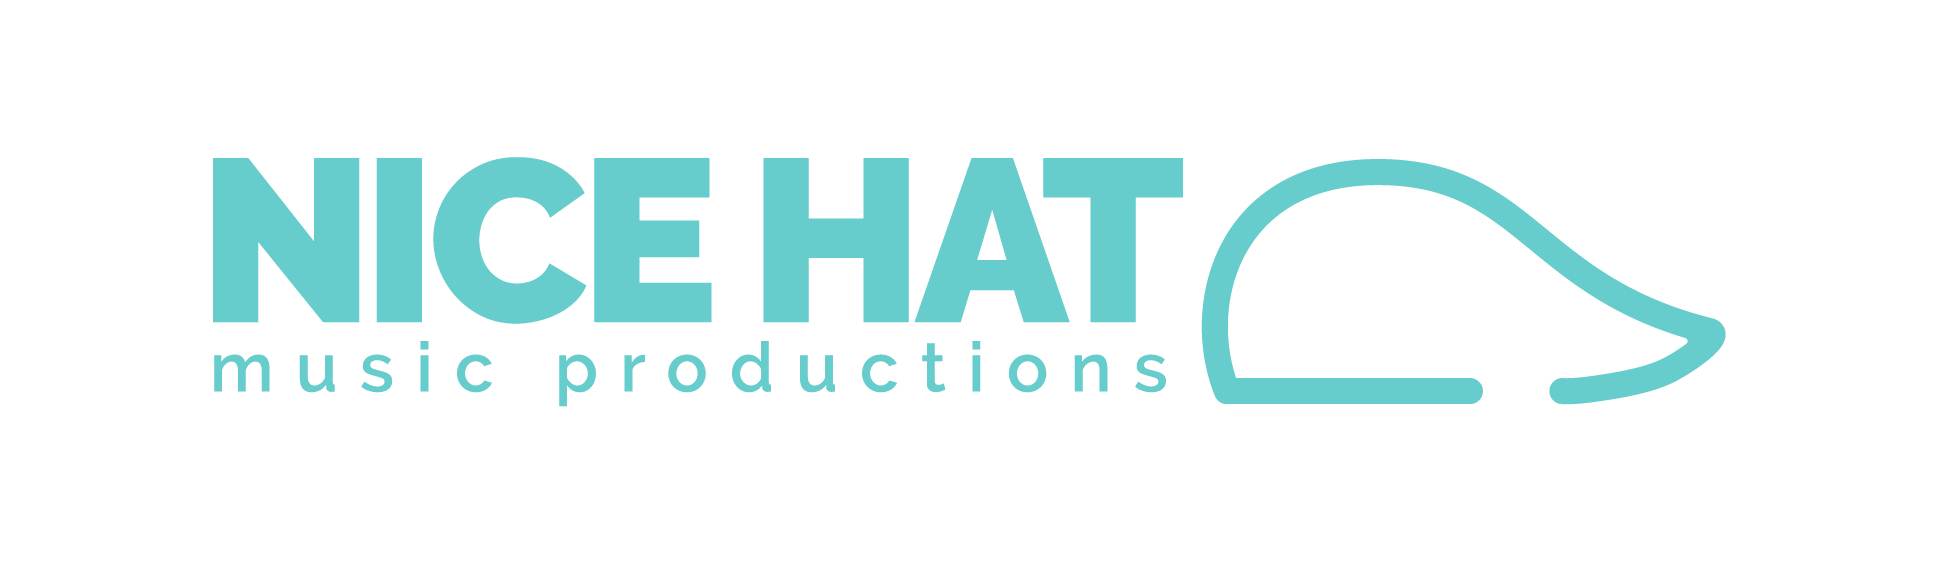 Nice Hat Music Productions